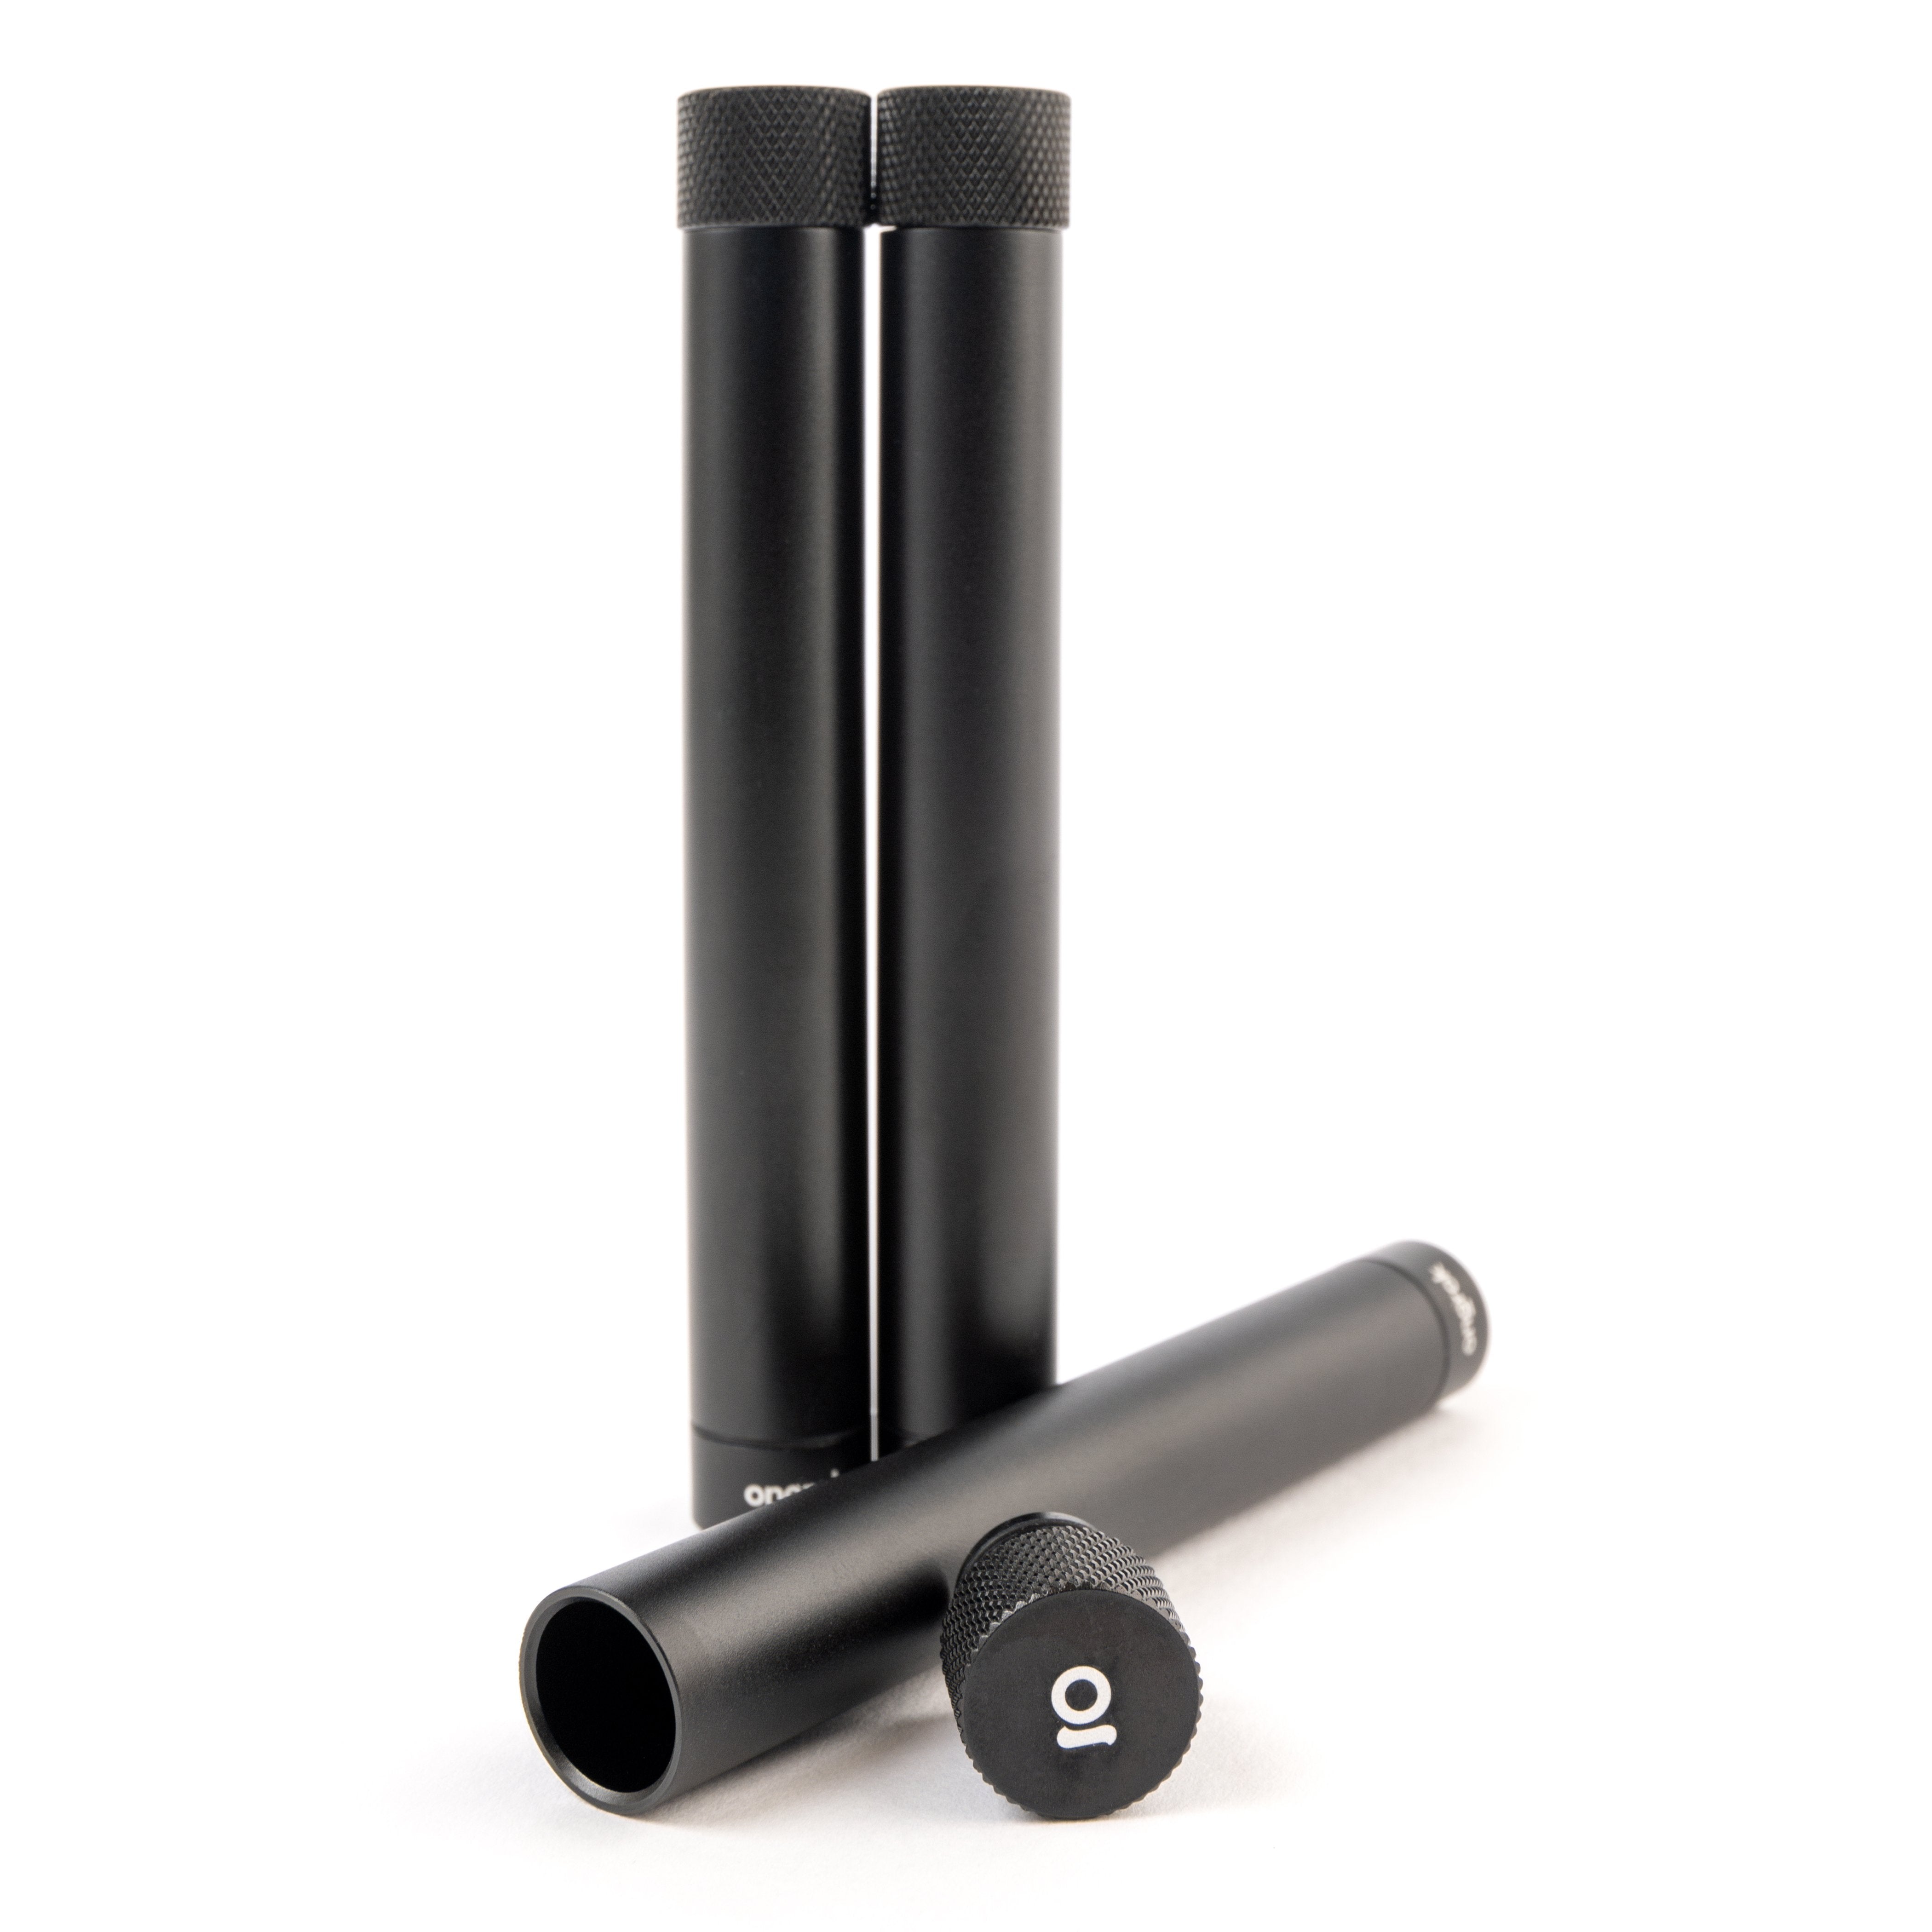 ONGROK Premium Storage Tubes - Smell-Proof and Durable